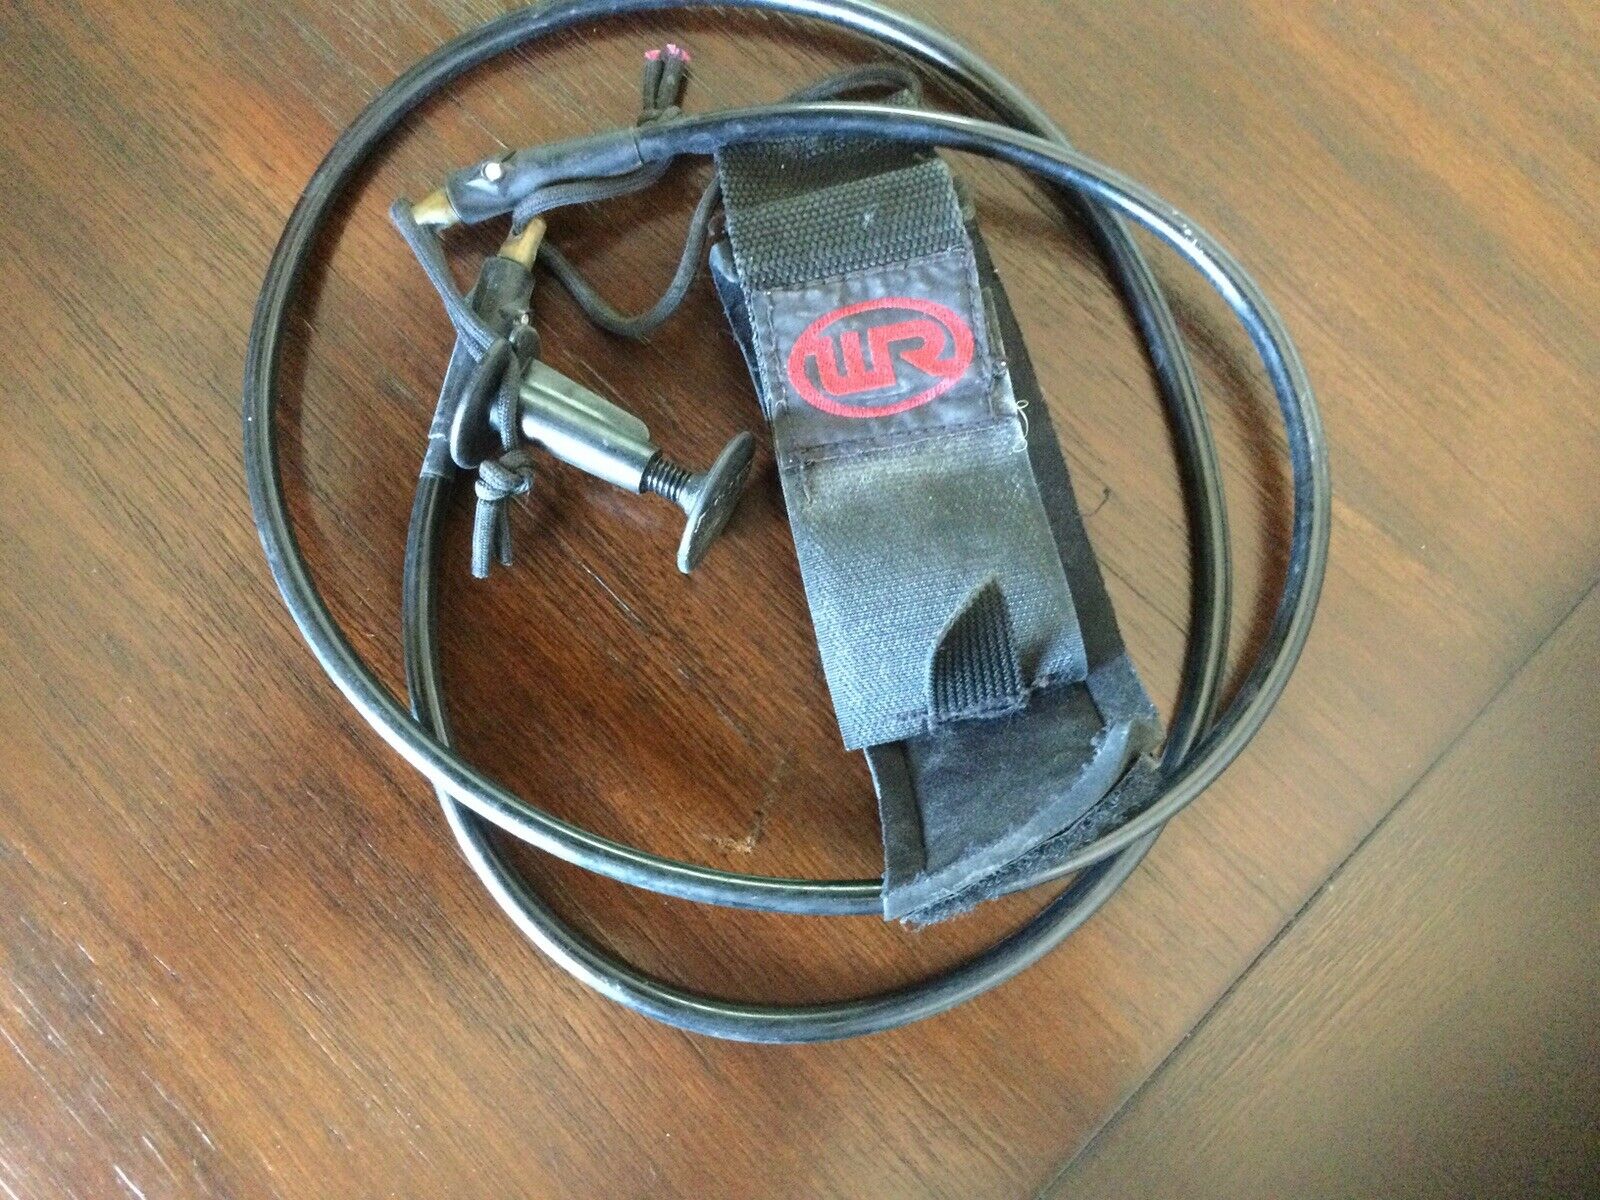 Wr Board Leash For Surf...50”...barely Used